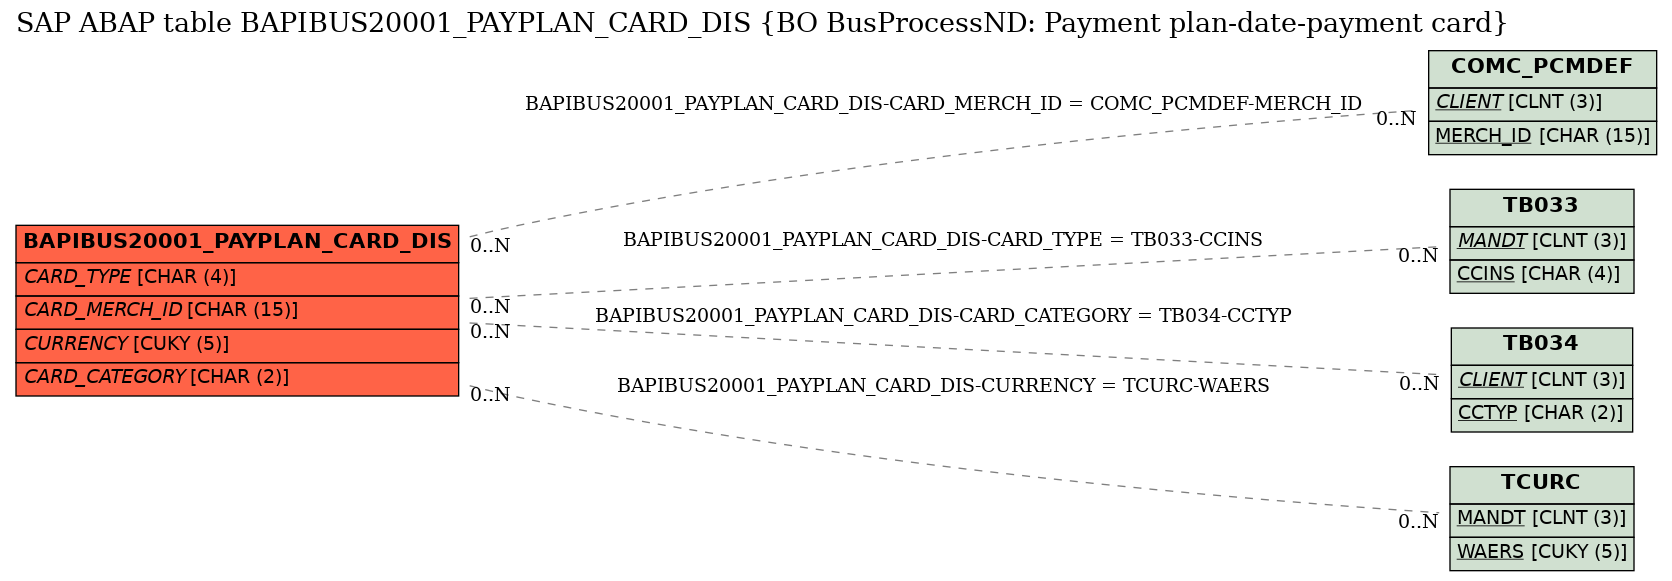 E-R Diagram for table BAPIBUS20001_PAYPLAN_CARD_DIS (BO BusProcessND: Payment plan-date-payment card)